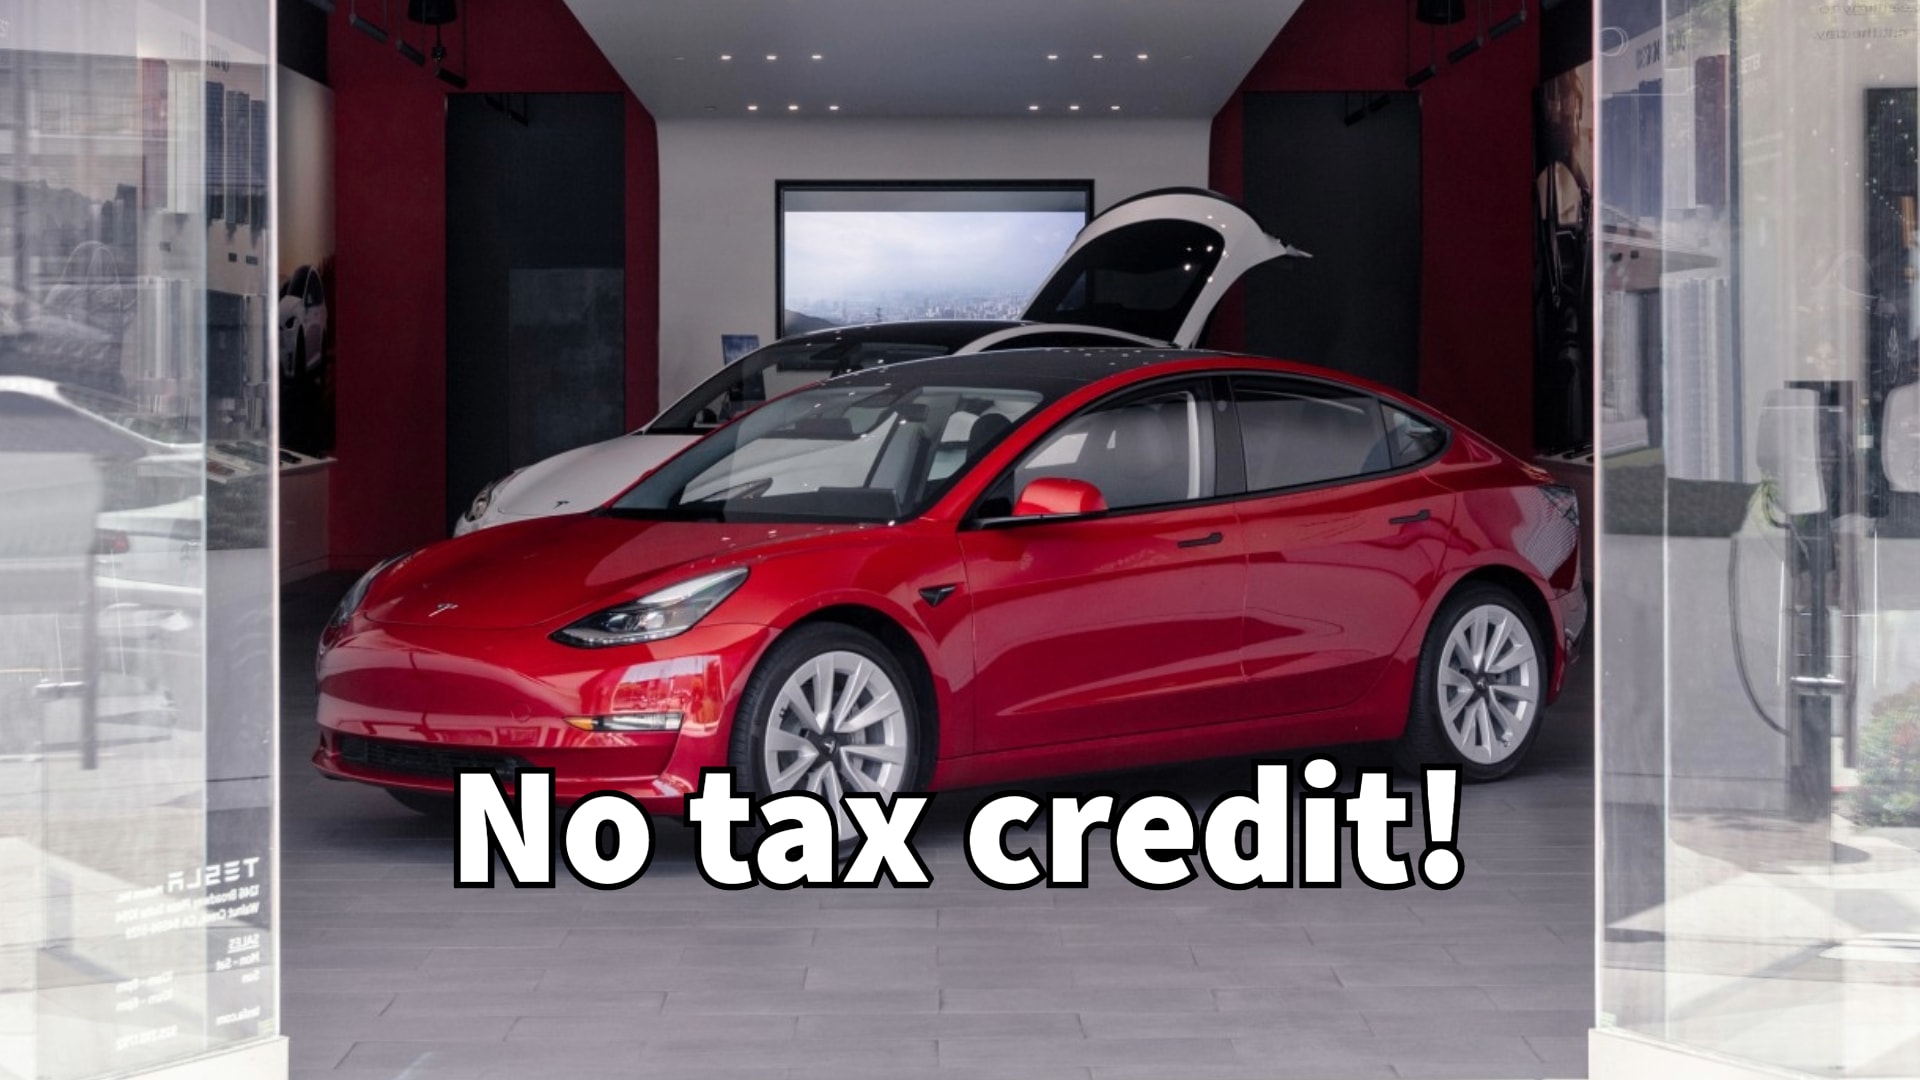 Tesla to lose $7,500 consumer tax credits for some Model 3 vehicles